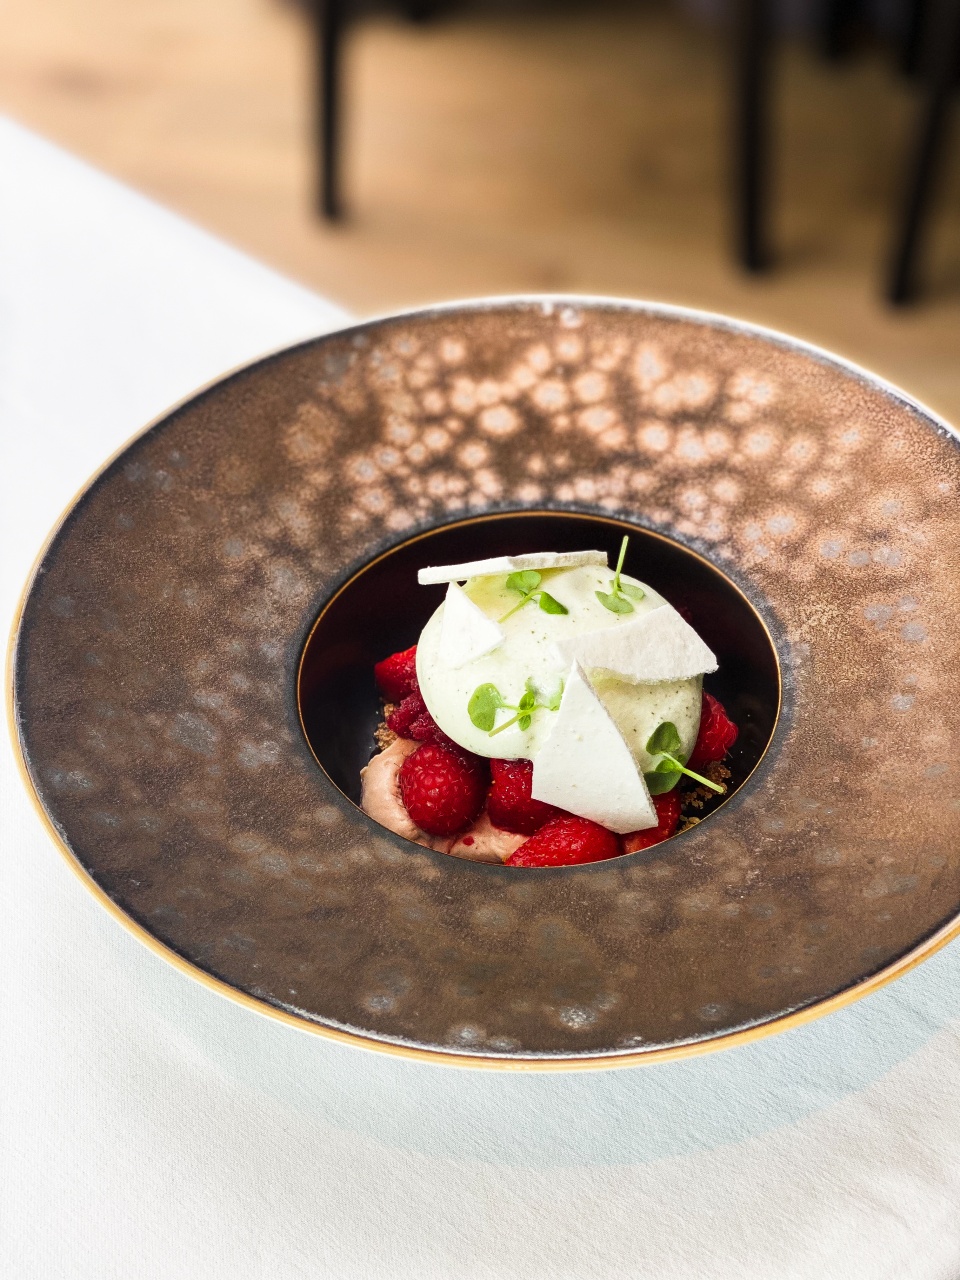 A subtly composed dessert of cremeaux of Verveine, espuma yogurt and meringe Italienne, beautifully presented with an artistic flair at restaurant De Bakermat.